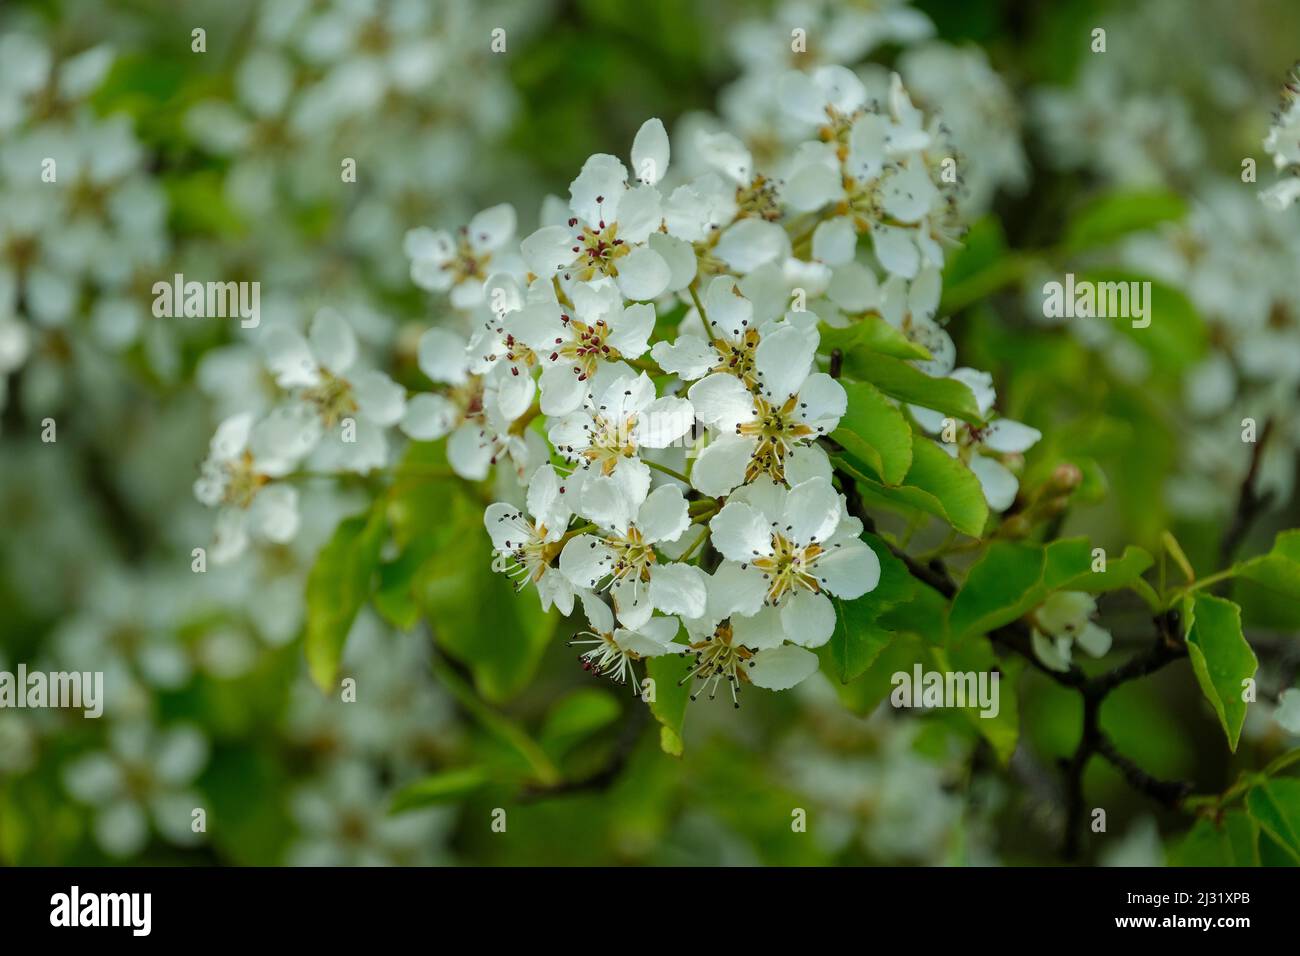 Pear, Plymouth, Pyrus cordata, White blossom that has a foul smell. Stock Photo